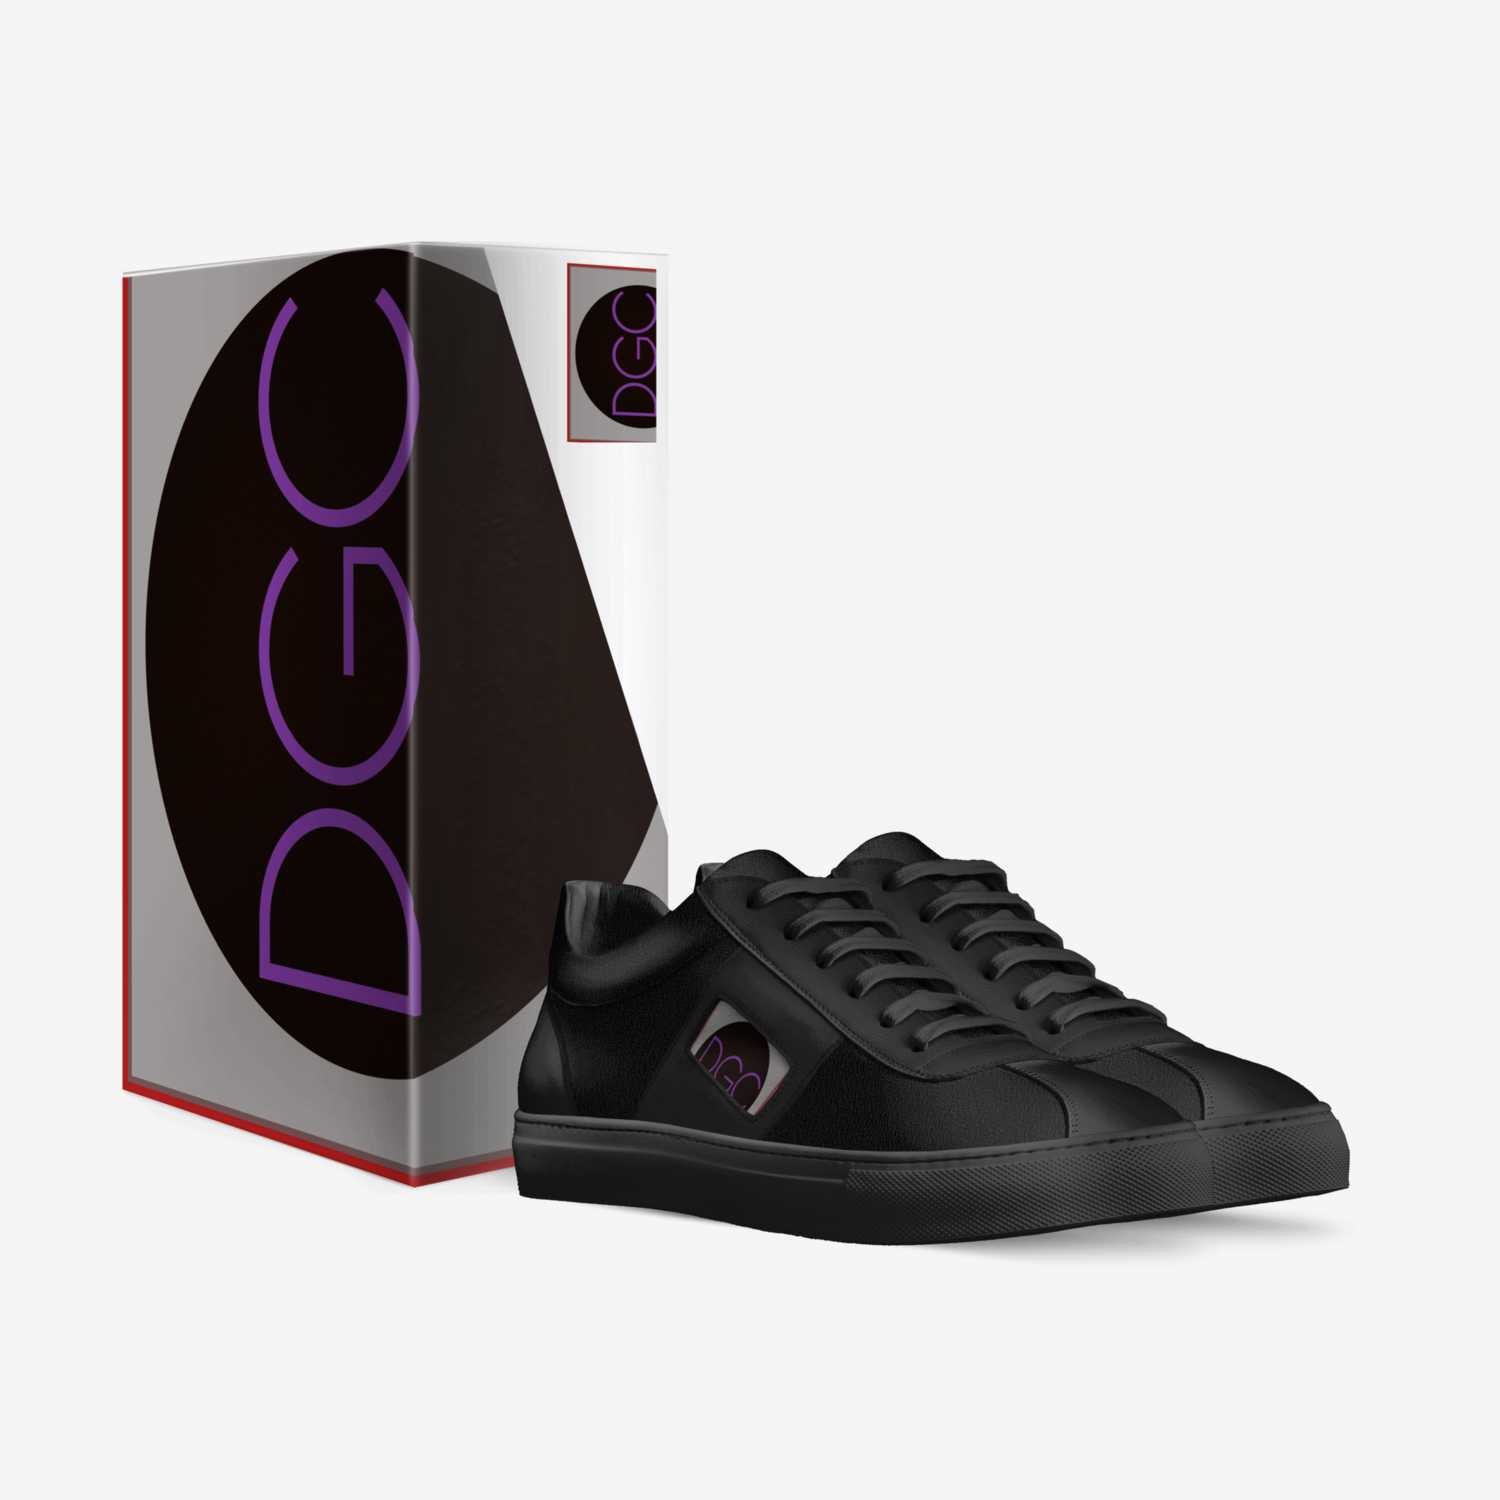 DGC custom made in Italy shoes by Demetrius Smith | Box view